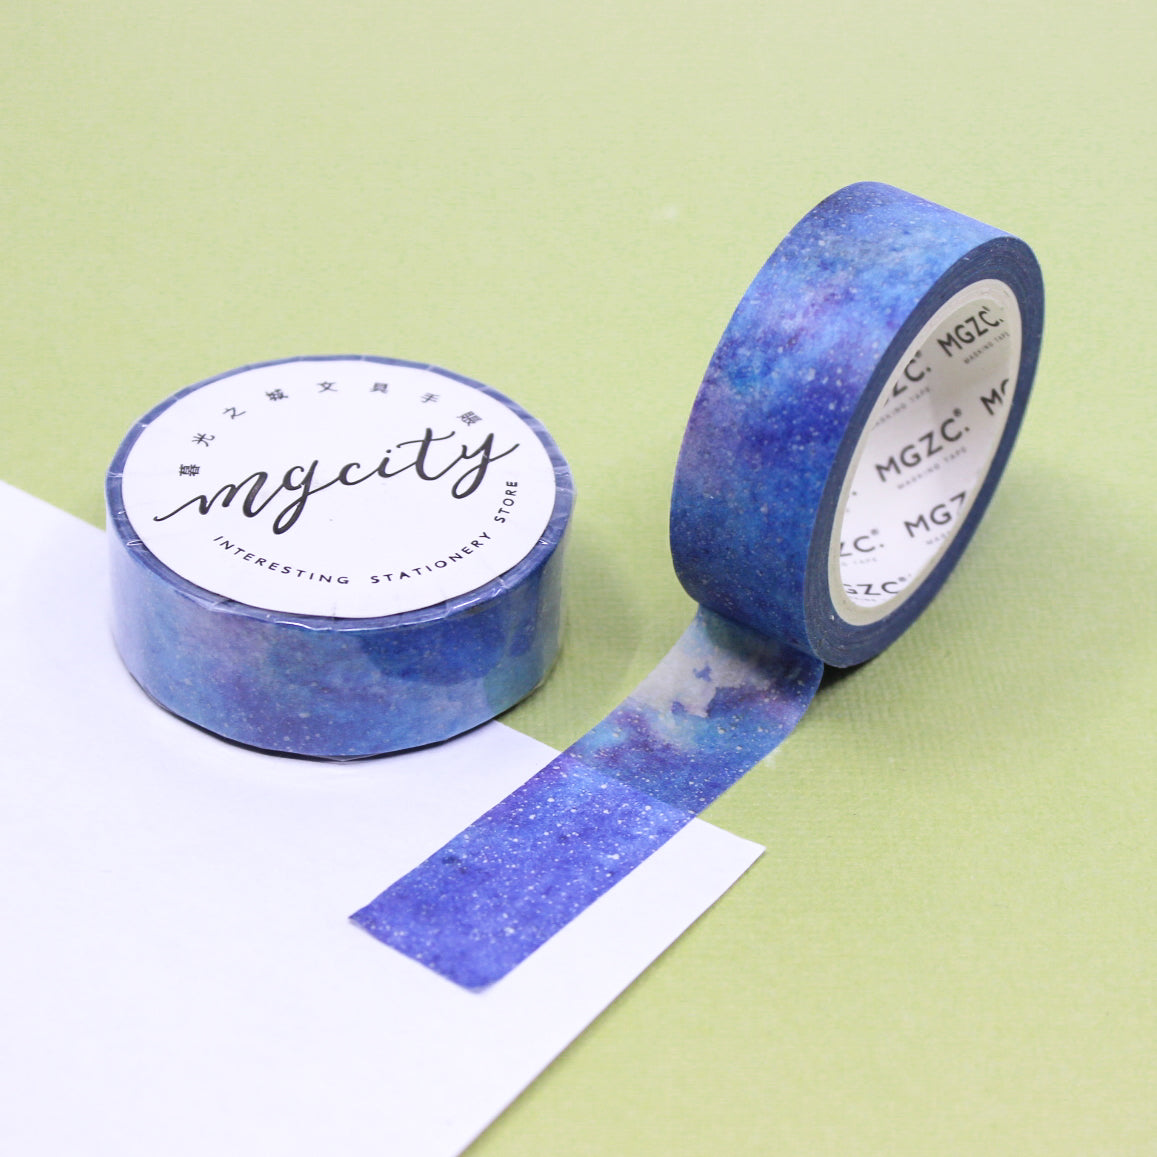 This blue marble watercolor washi tape is the perfect addition to your washi collection. The simplicity of the pattern is perfect for accenting and matching any project's theme while adding a beautiful and interesting pattern. This tape is sold at BBB Supplies Craft Shop.